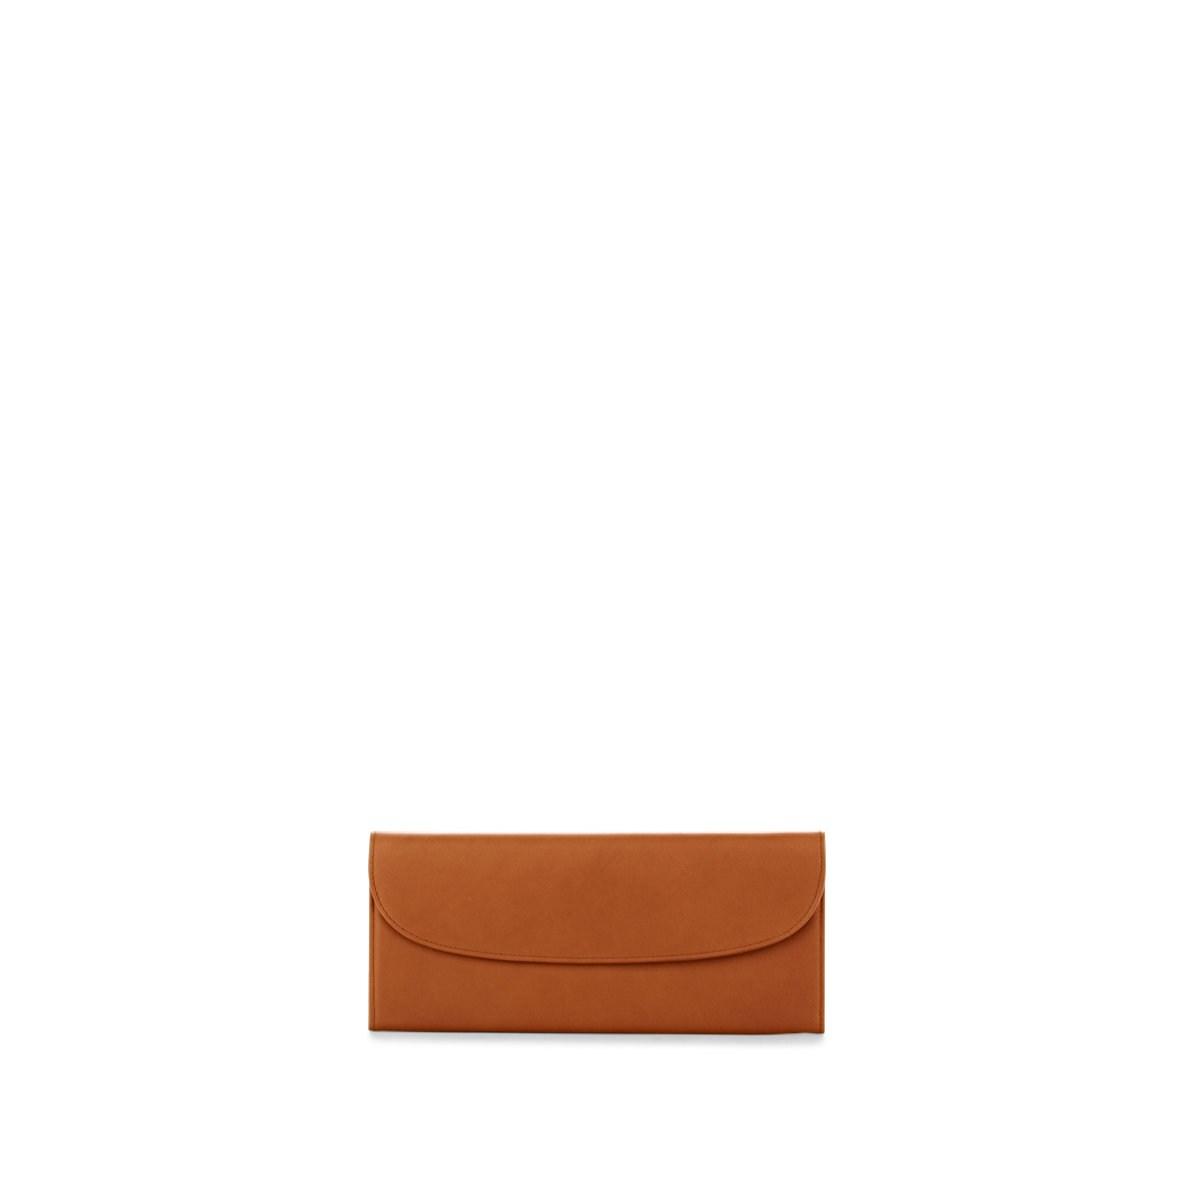 Barneys New York Leather Travel Wallet in Brown for Men - Lyst